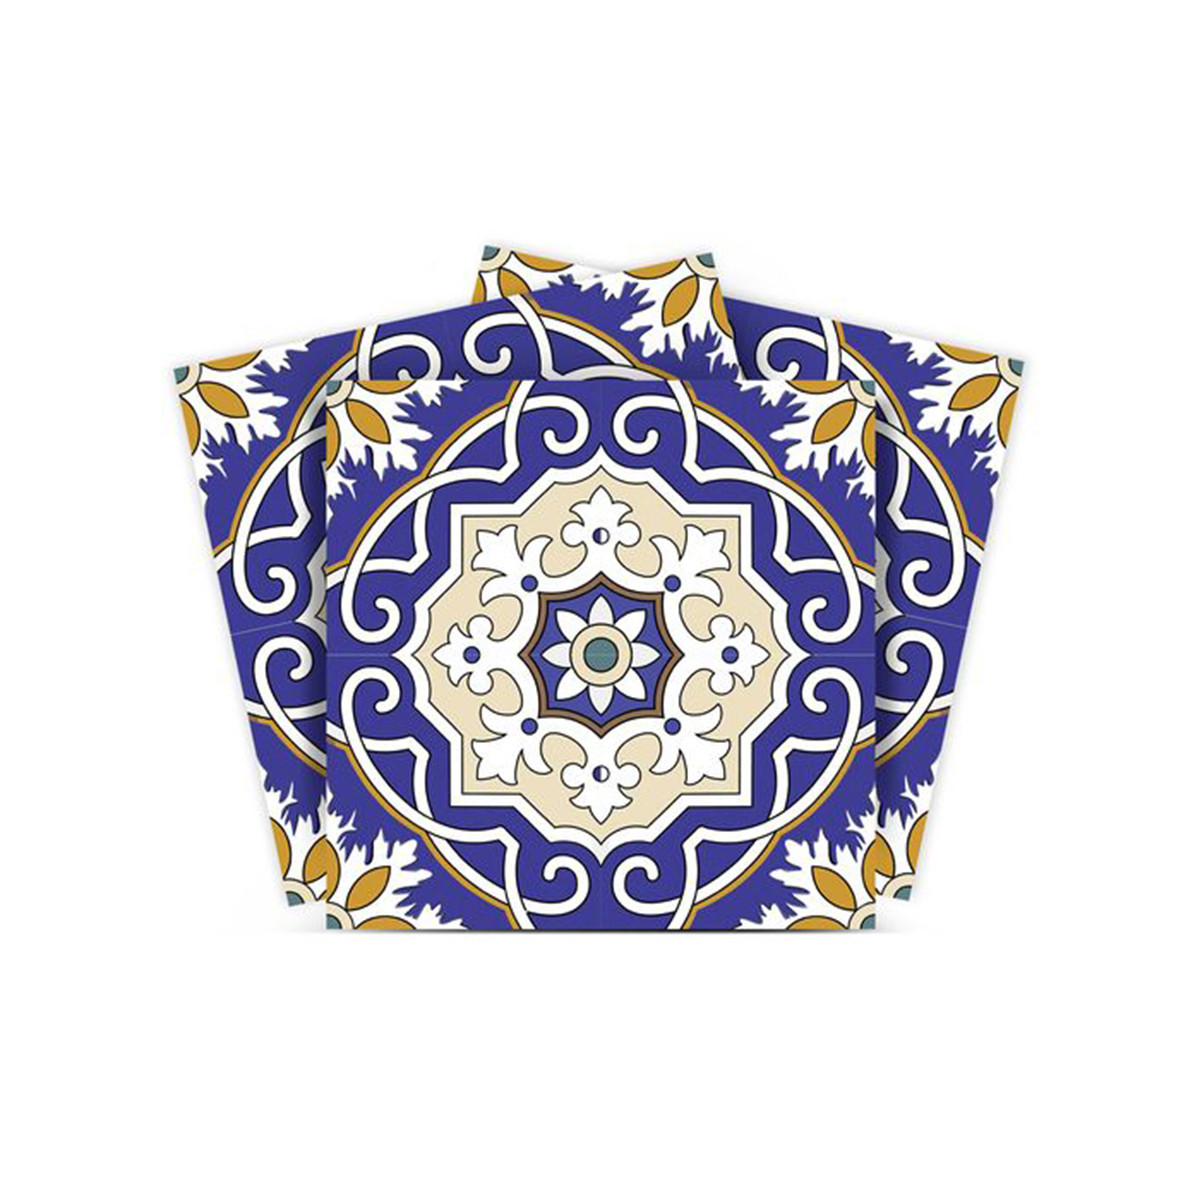 6" X 6" Blue White and Gold Mosaic Removable Tiles-399832-1